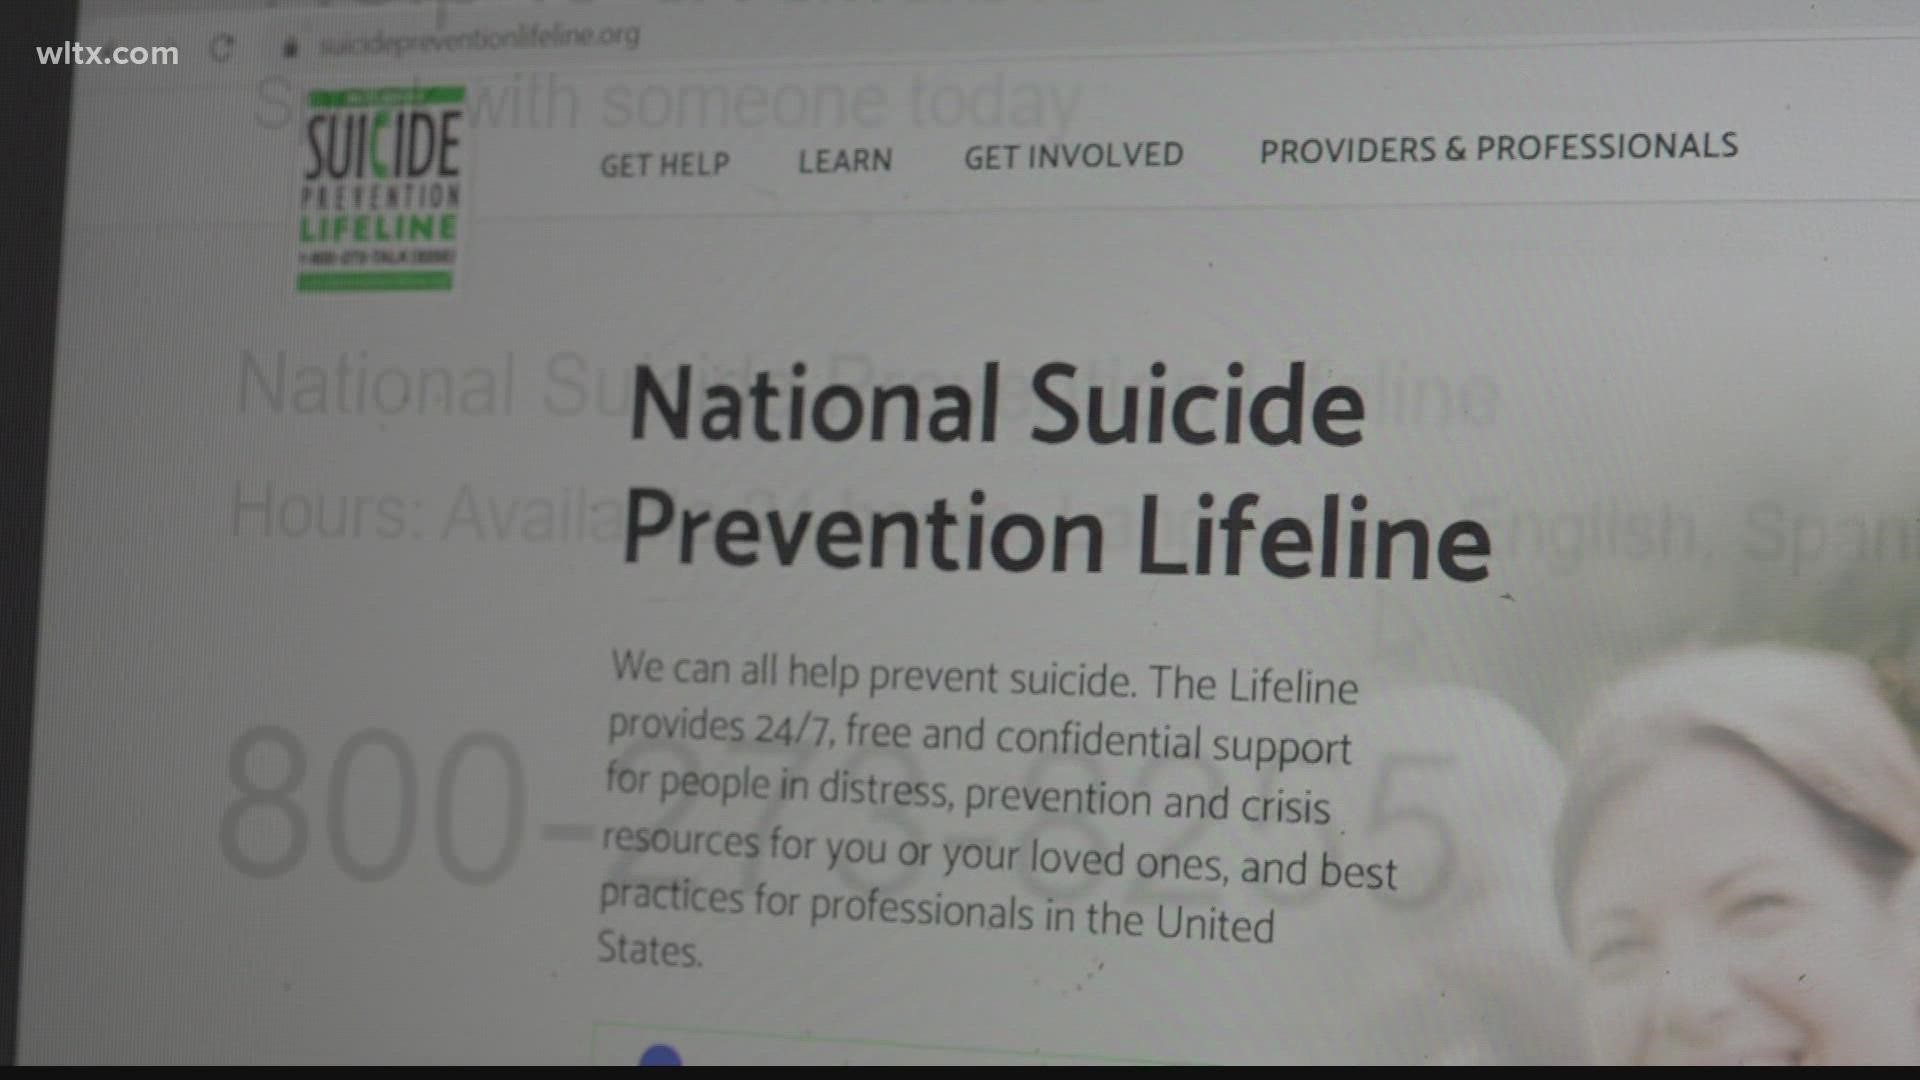 Starting July 16, people in a mental health crisis will be able to dial 9-8-8 to reach the National Suicide Prevention Lifeline hotline.